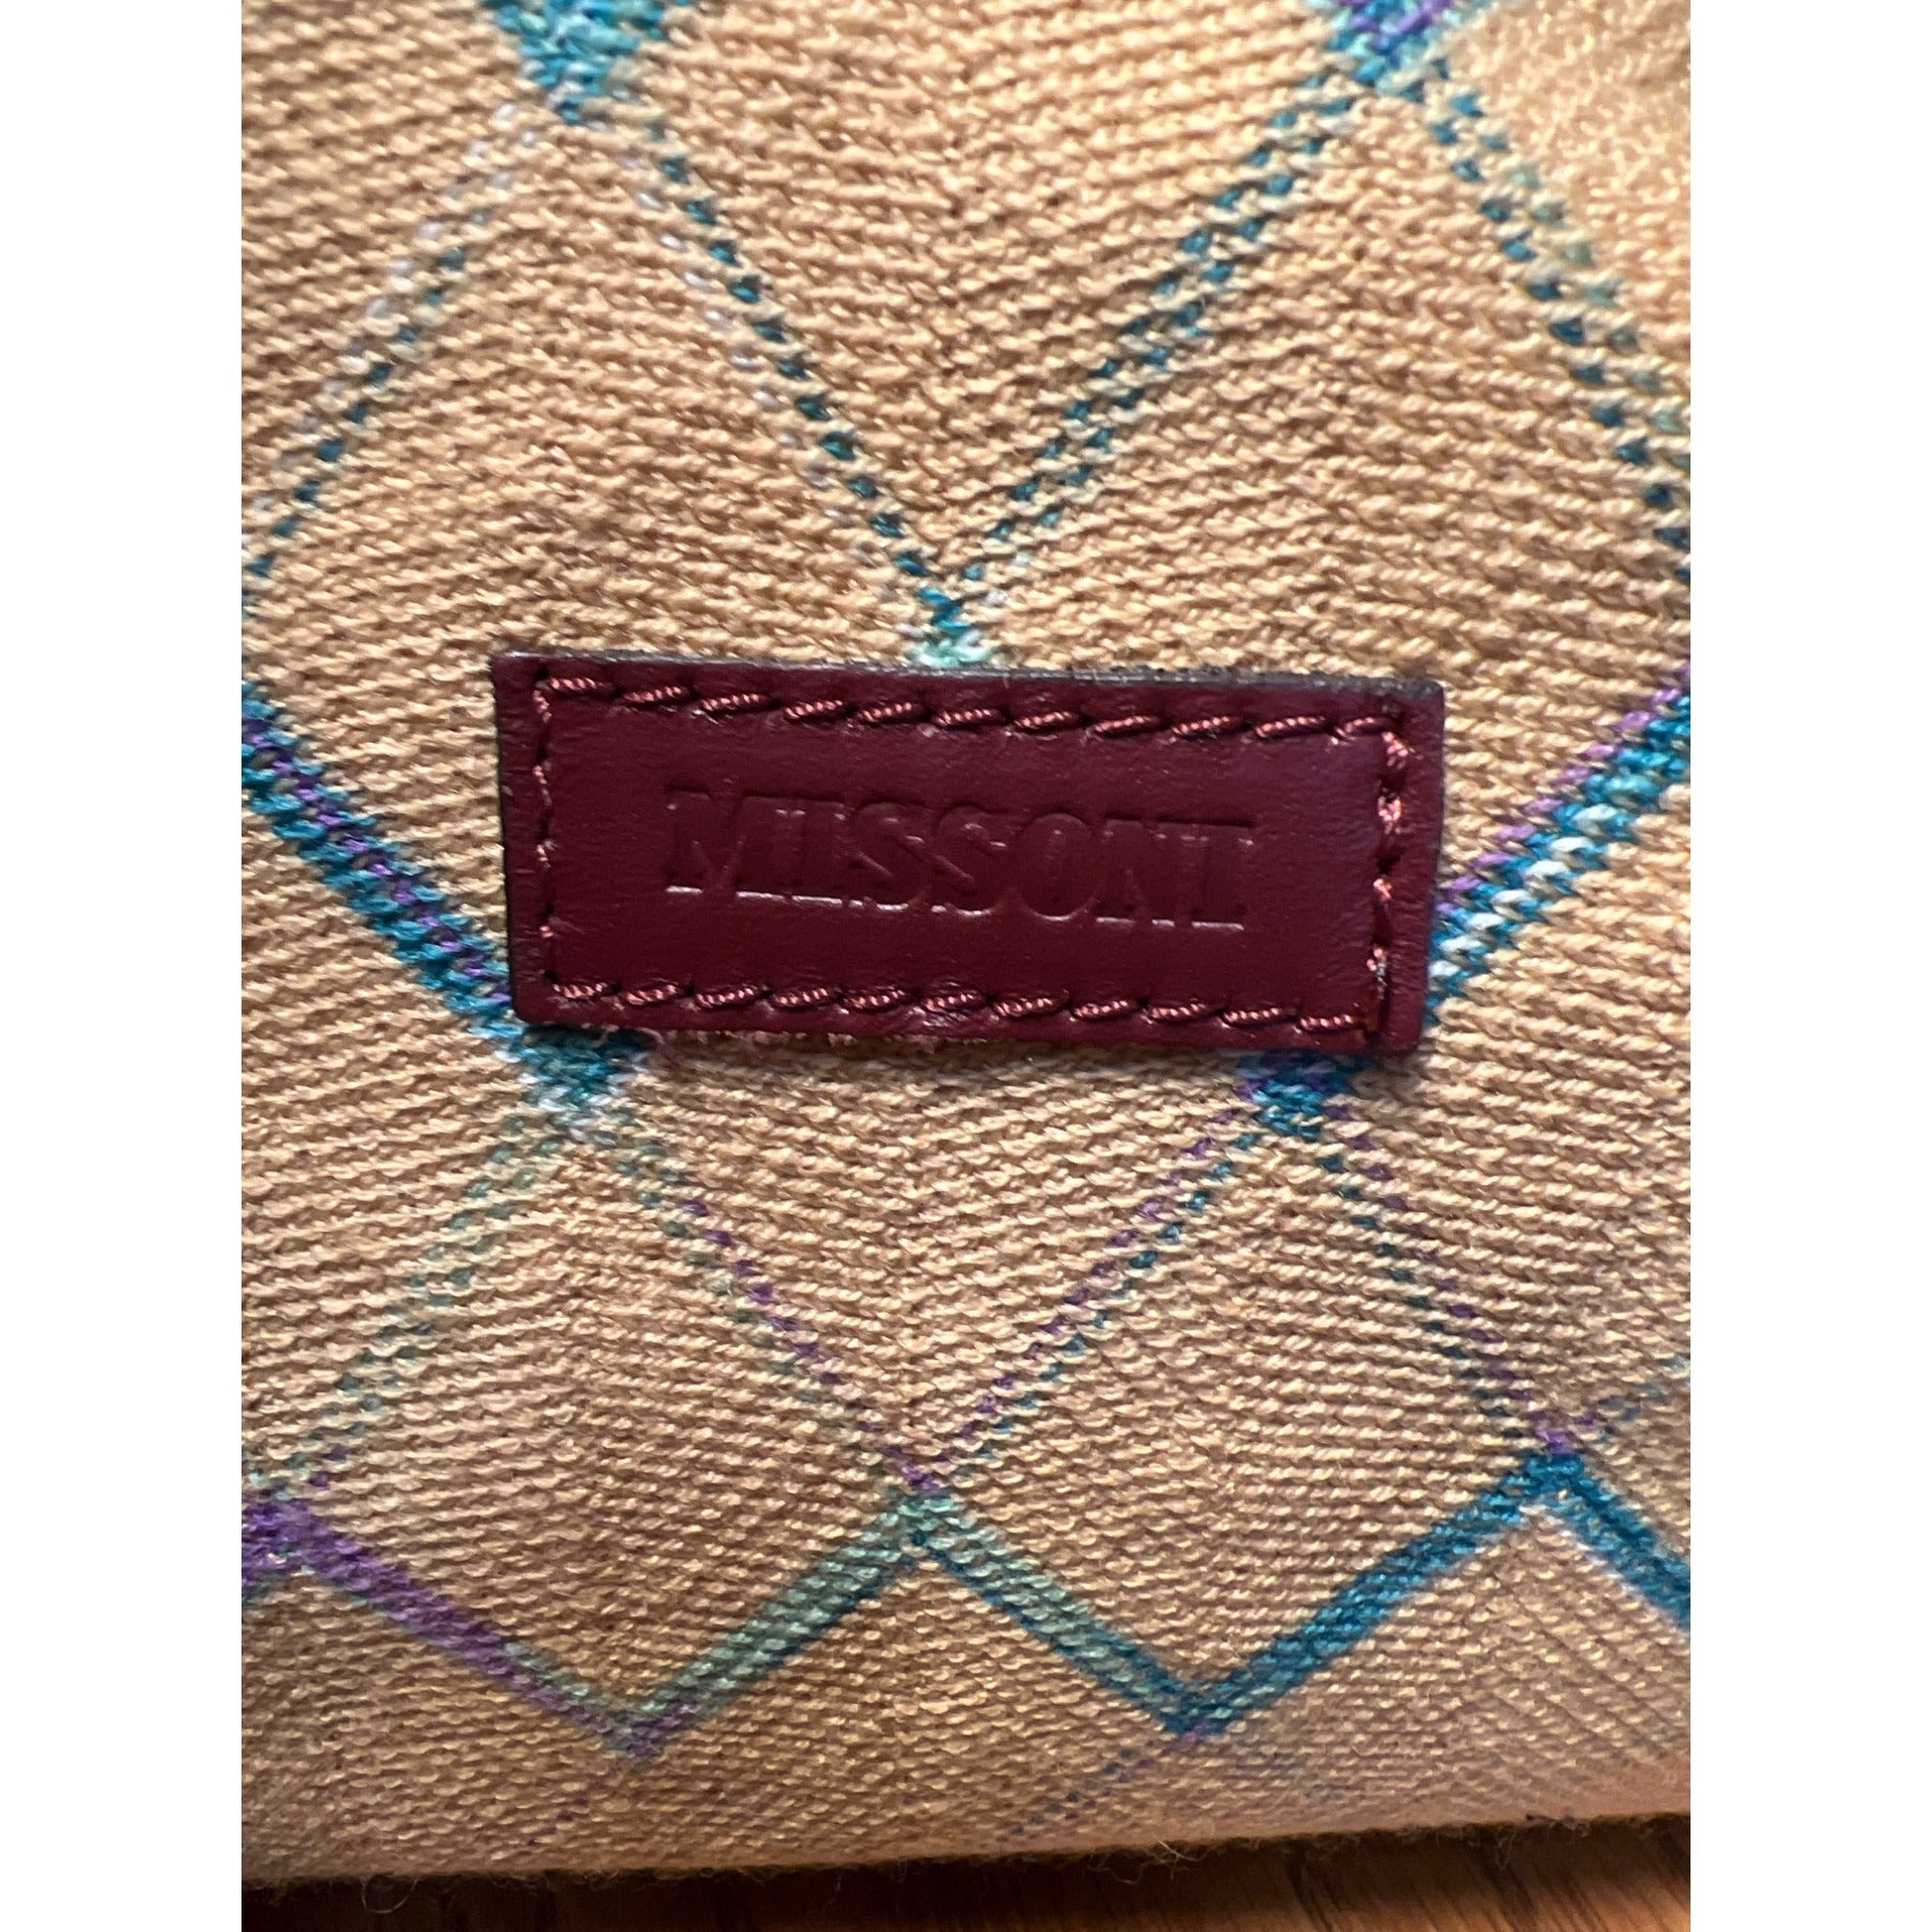 Missoni Knit Satchel Bag Made in Italy